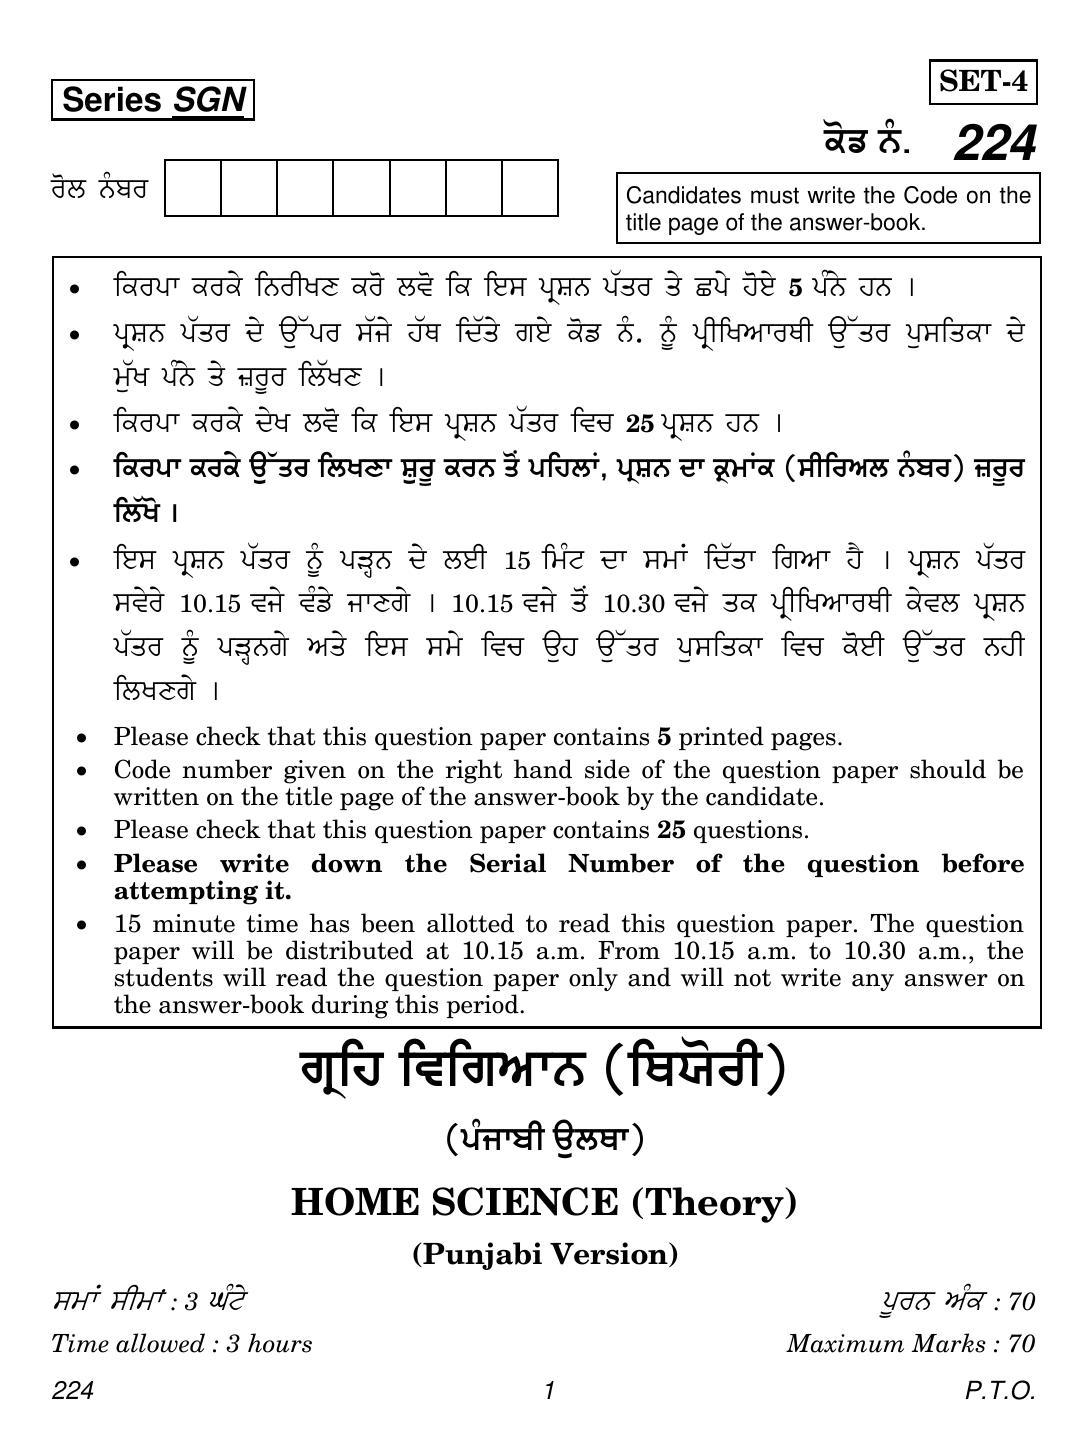 CBSE Class 12 224 (Home Science Punjabi) 2018 Question Paper - Page 1